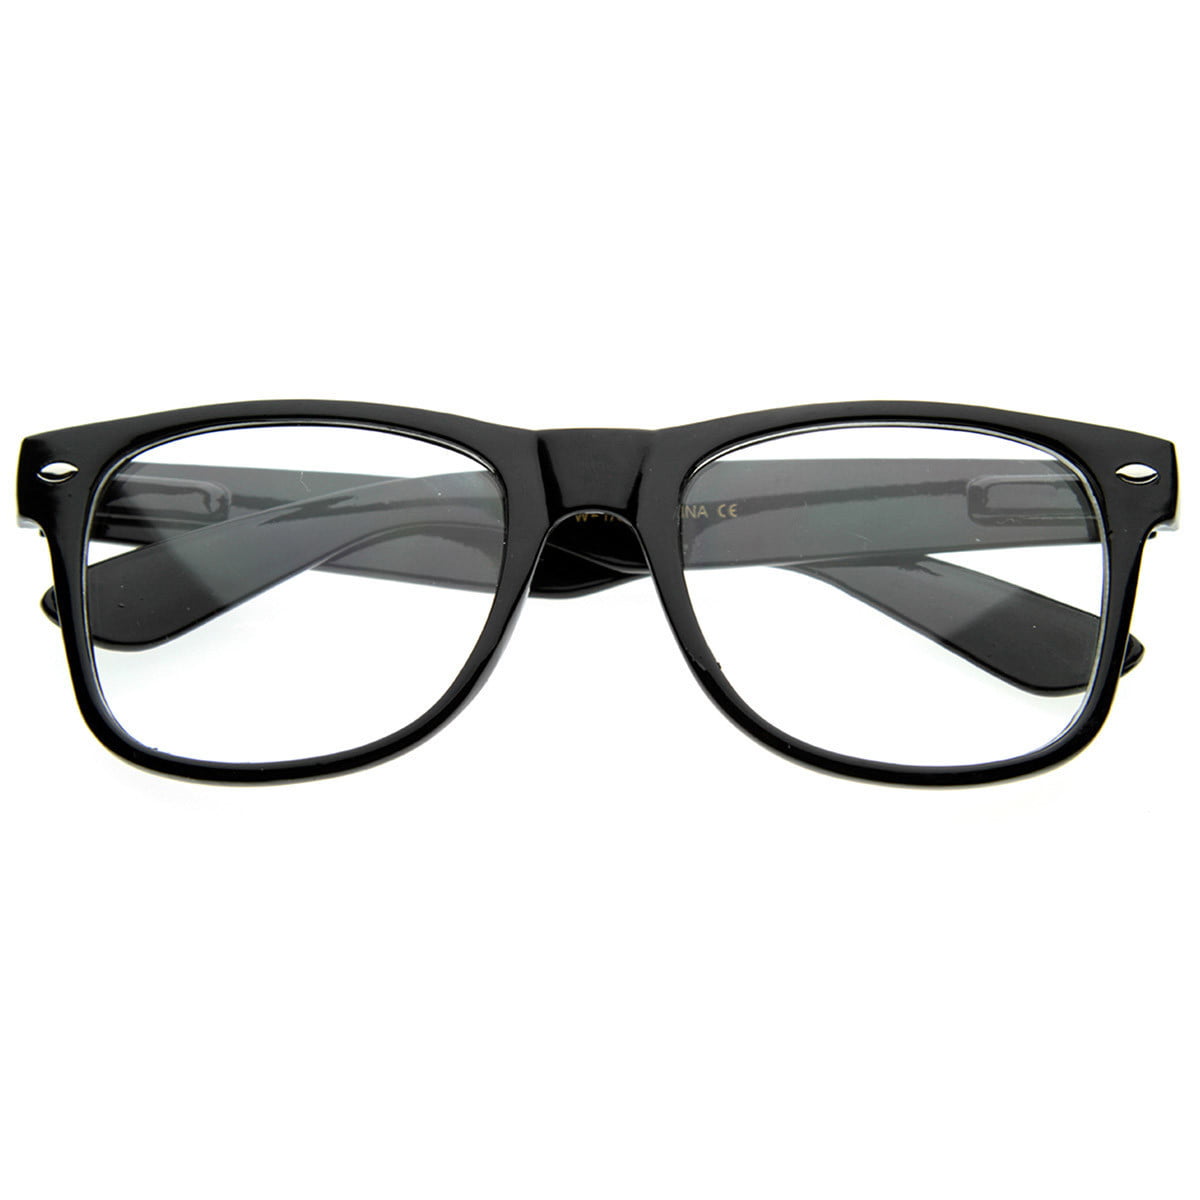 Nerdy Clear Lens Glasses Big Lens Geek Over Sized Fashion Clear Glasses Unisex 